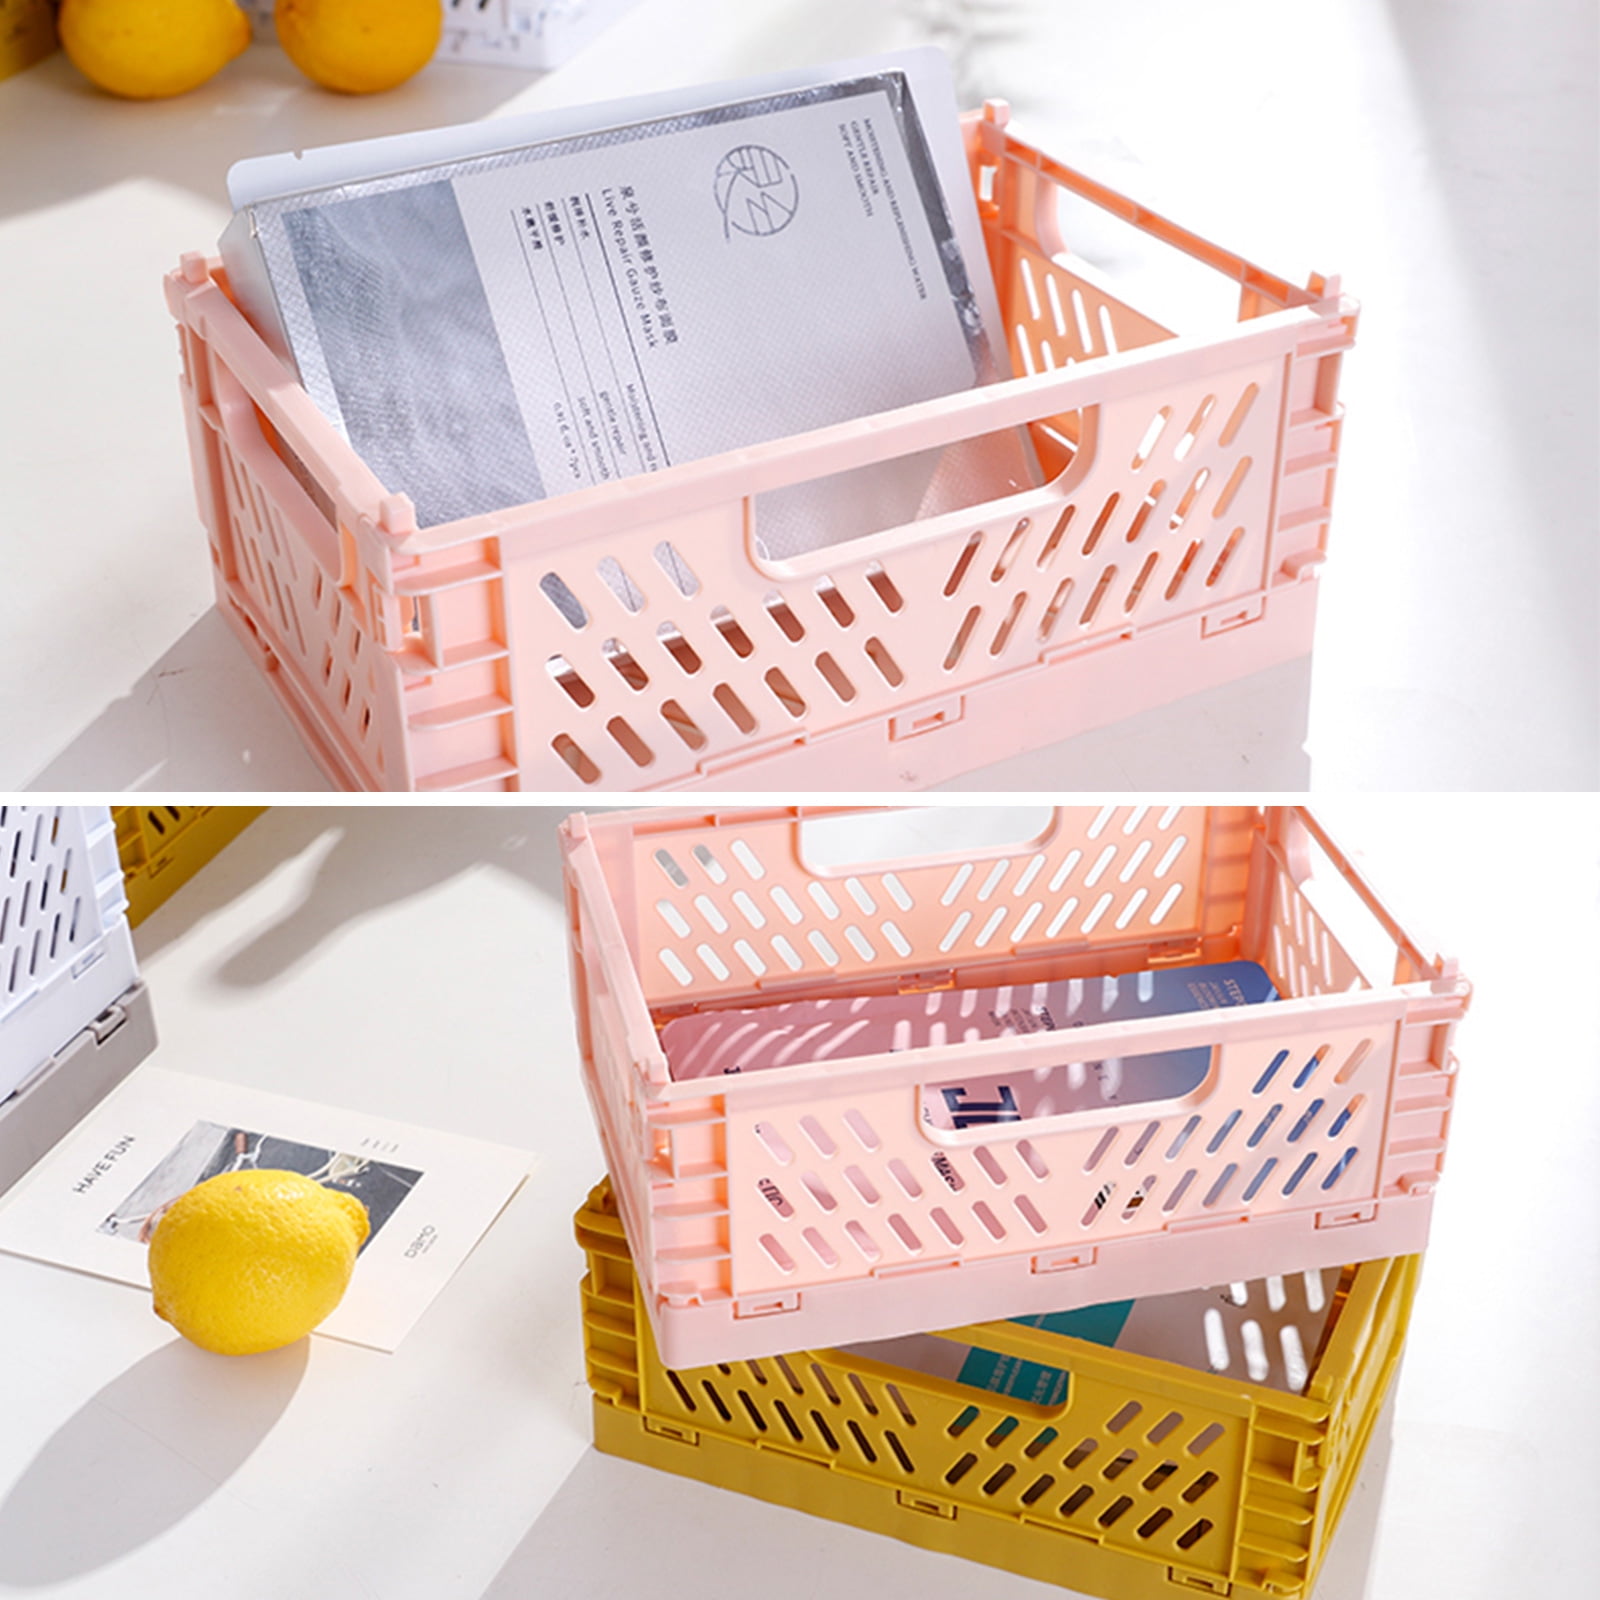 B Biden 4-Pack Mini Plastic Baskets for Organizing and Storage, Collapsible Space Saving Crates, Office Desk Drawer Organizer, Small Size Storage Bins for